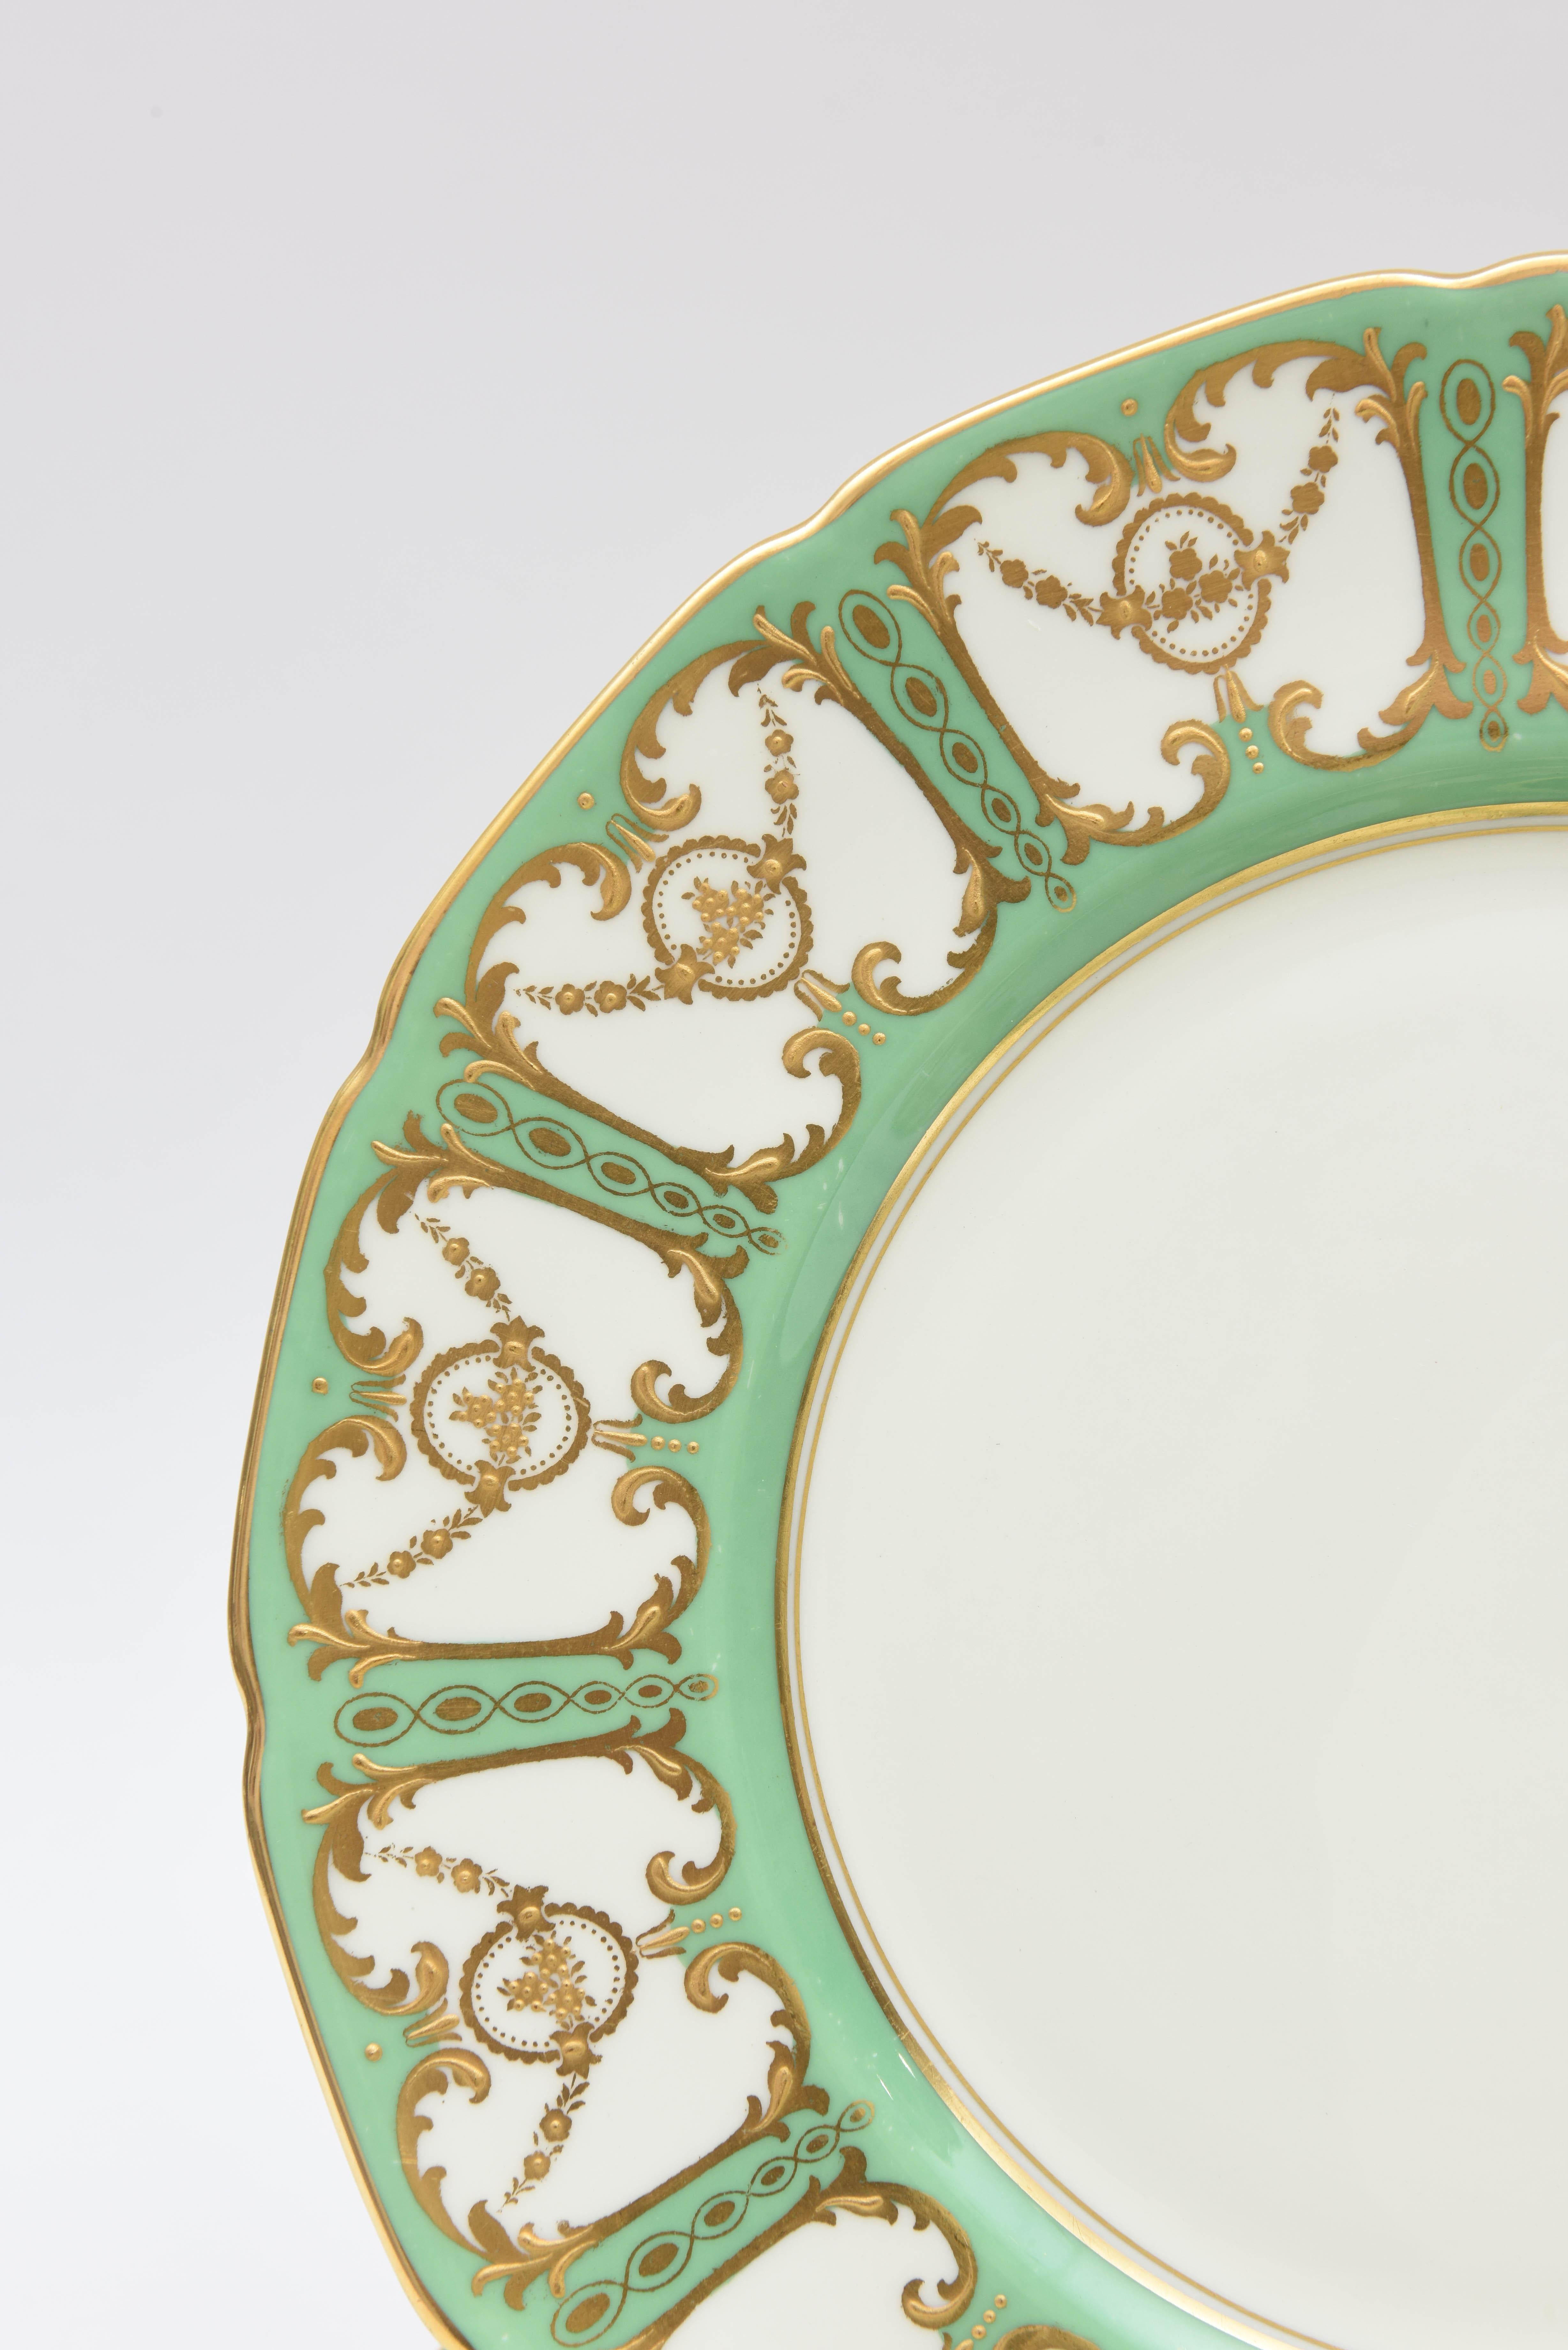 One of our favourite makers and colors, this great set of Royal Doulton England Porcelain plates feature cartouches of raised gilt foliate swag on the collars of the plates in a soft Sevres Green ground. Perfect for mixing and matching in with all